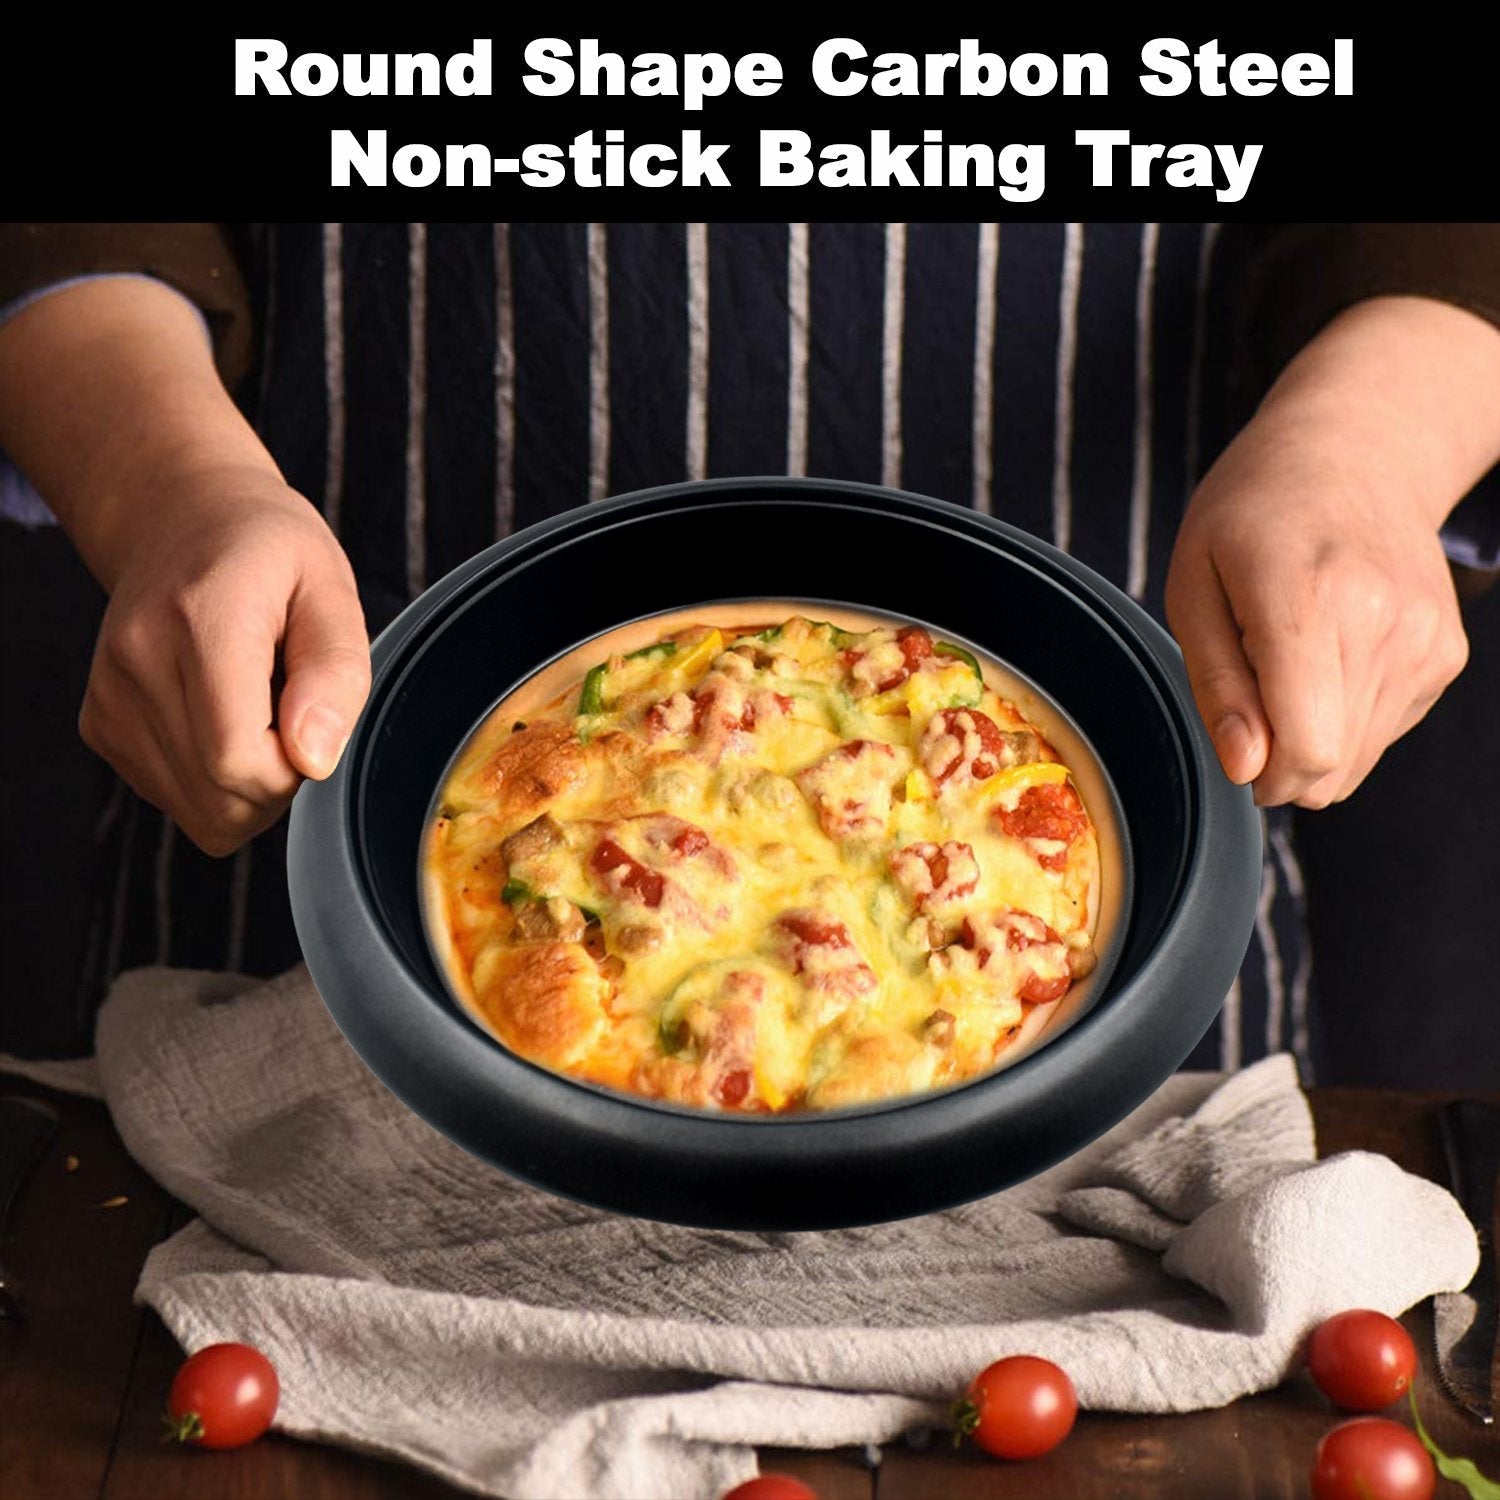 7034 Round Shape Carbon Steel Non-stick Baking Tray (11 Inch) DeoDap